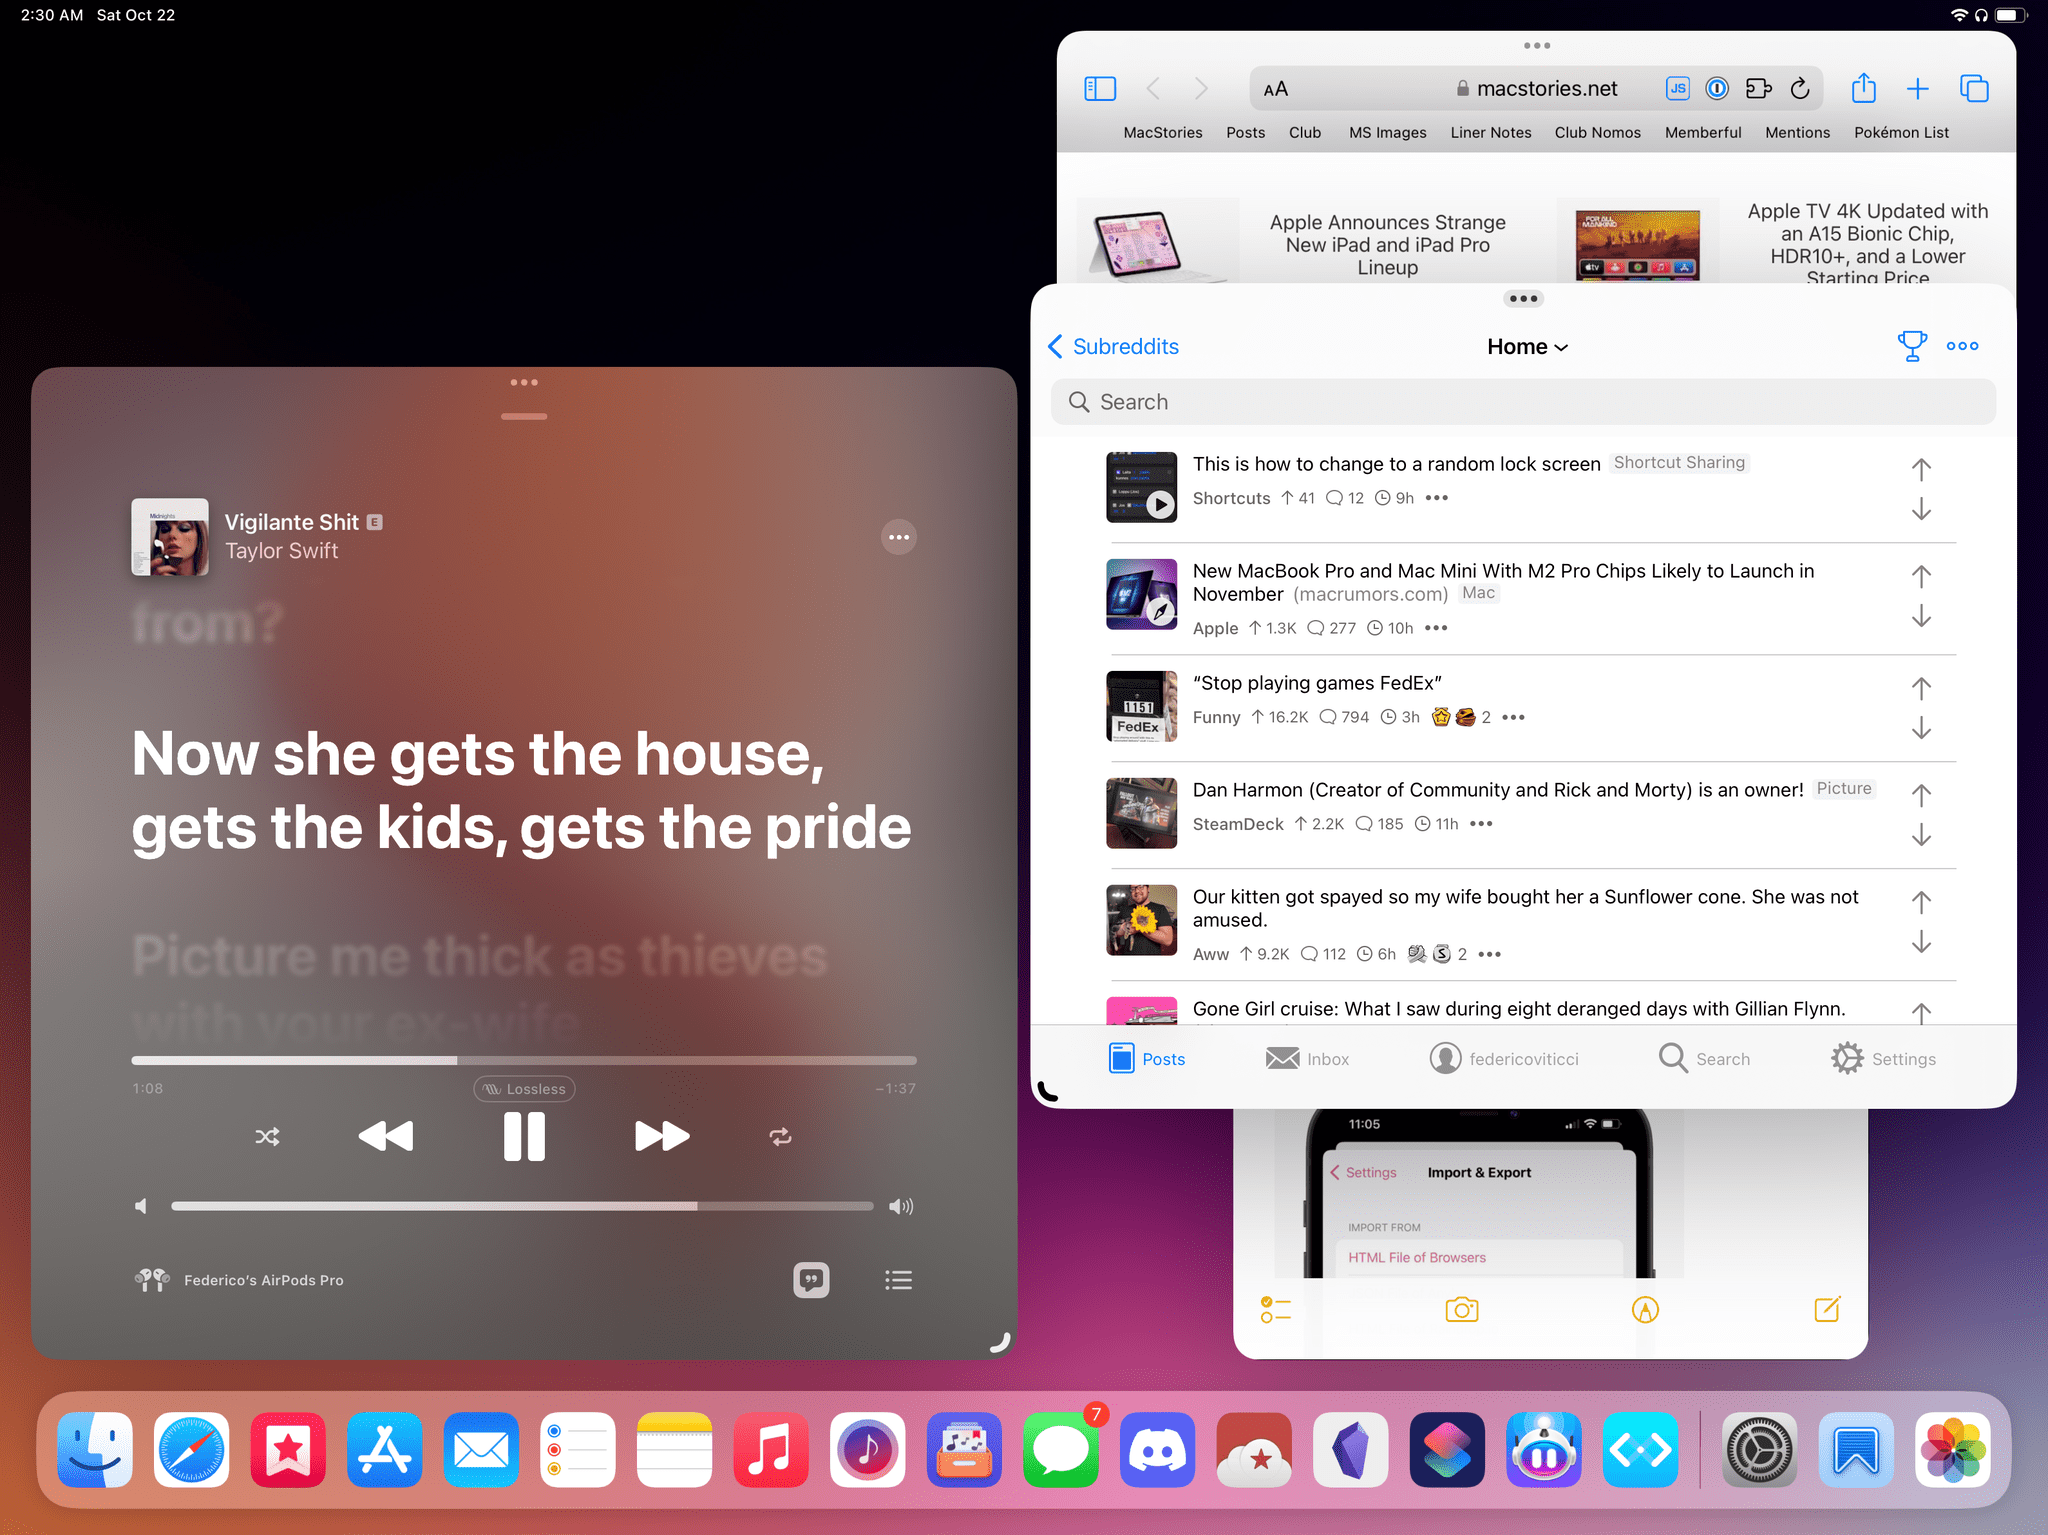 When I dragged in Apollo from the dock, Shortcuts was removed from the workspace and put back into the strip (which is hidden).